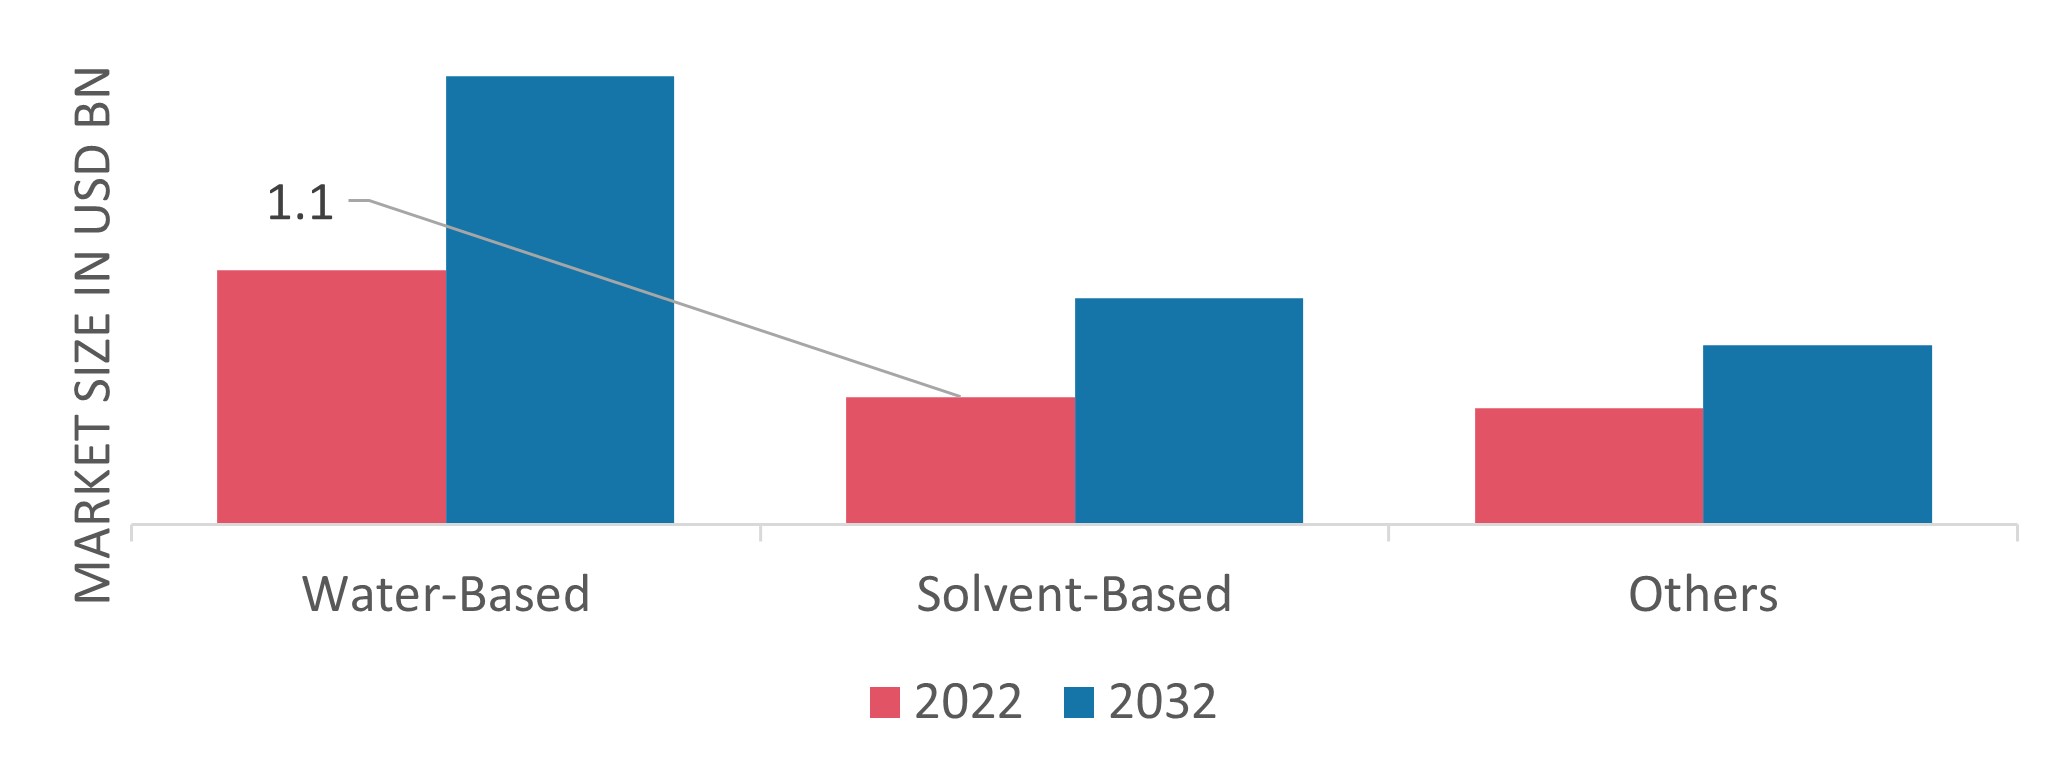 Mold Release Agent Market, by Type channel, 2022 & 2032